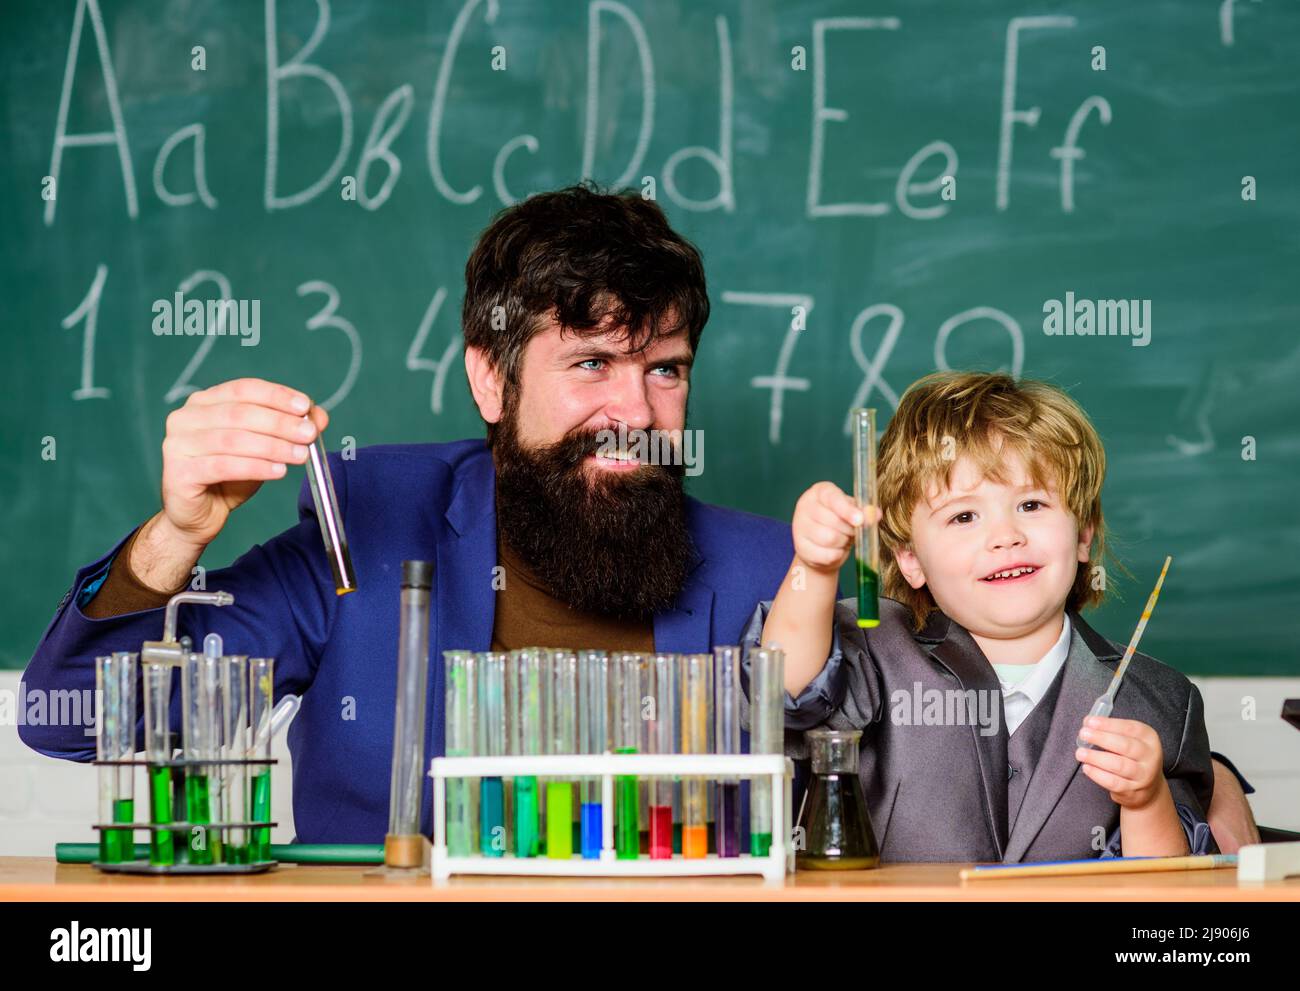 Perseverance pays off. School lesson. Chemical experiment. Symptoms of ADHD at school. Educational school program. Schoolboy cute child experimenting Stock Photo